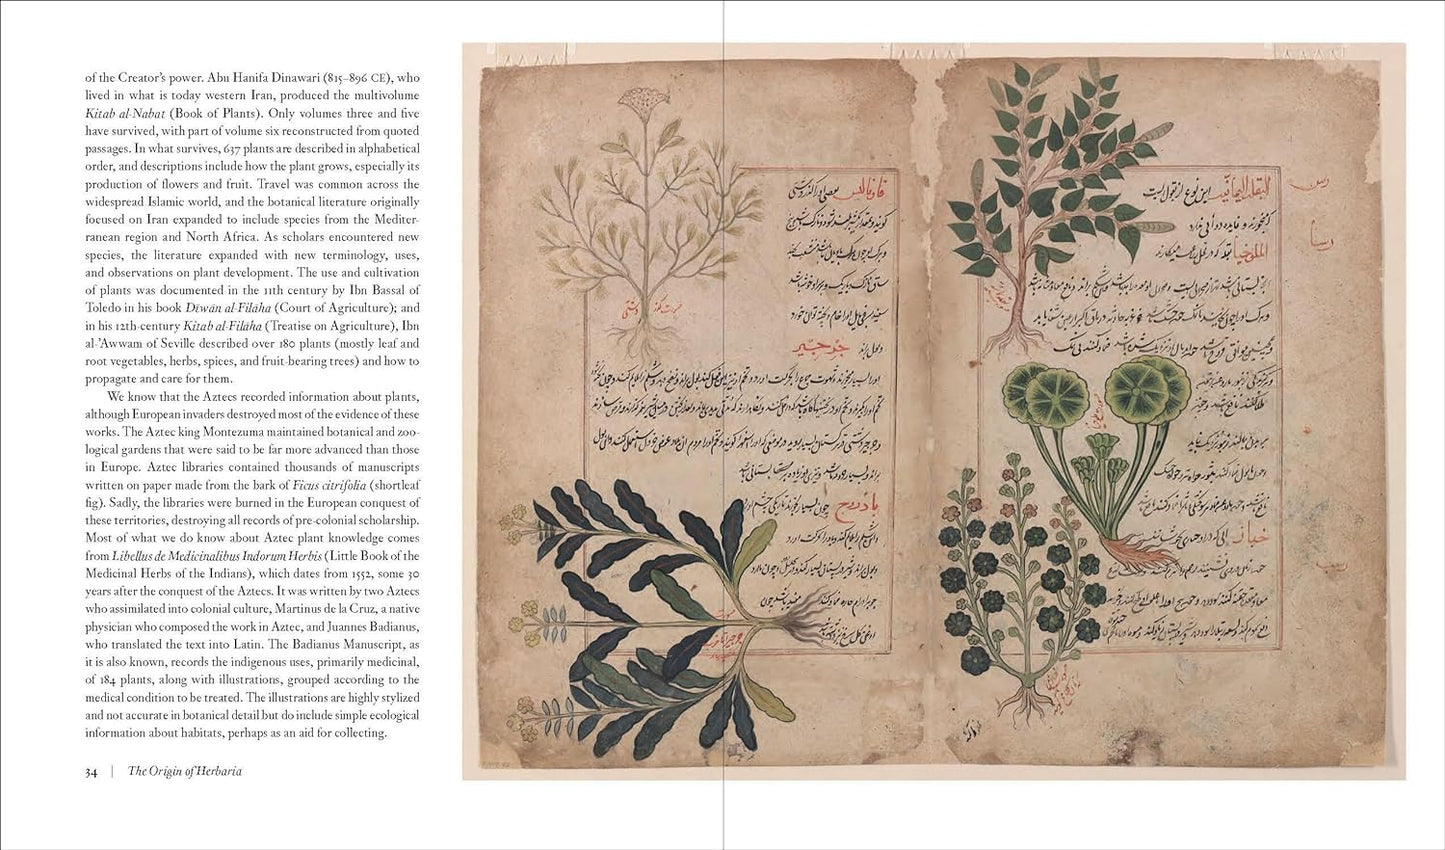 Herbarium: The Quest to Preserve and Classify the World's Plants